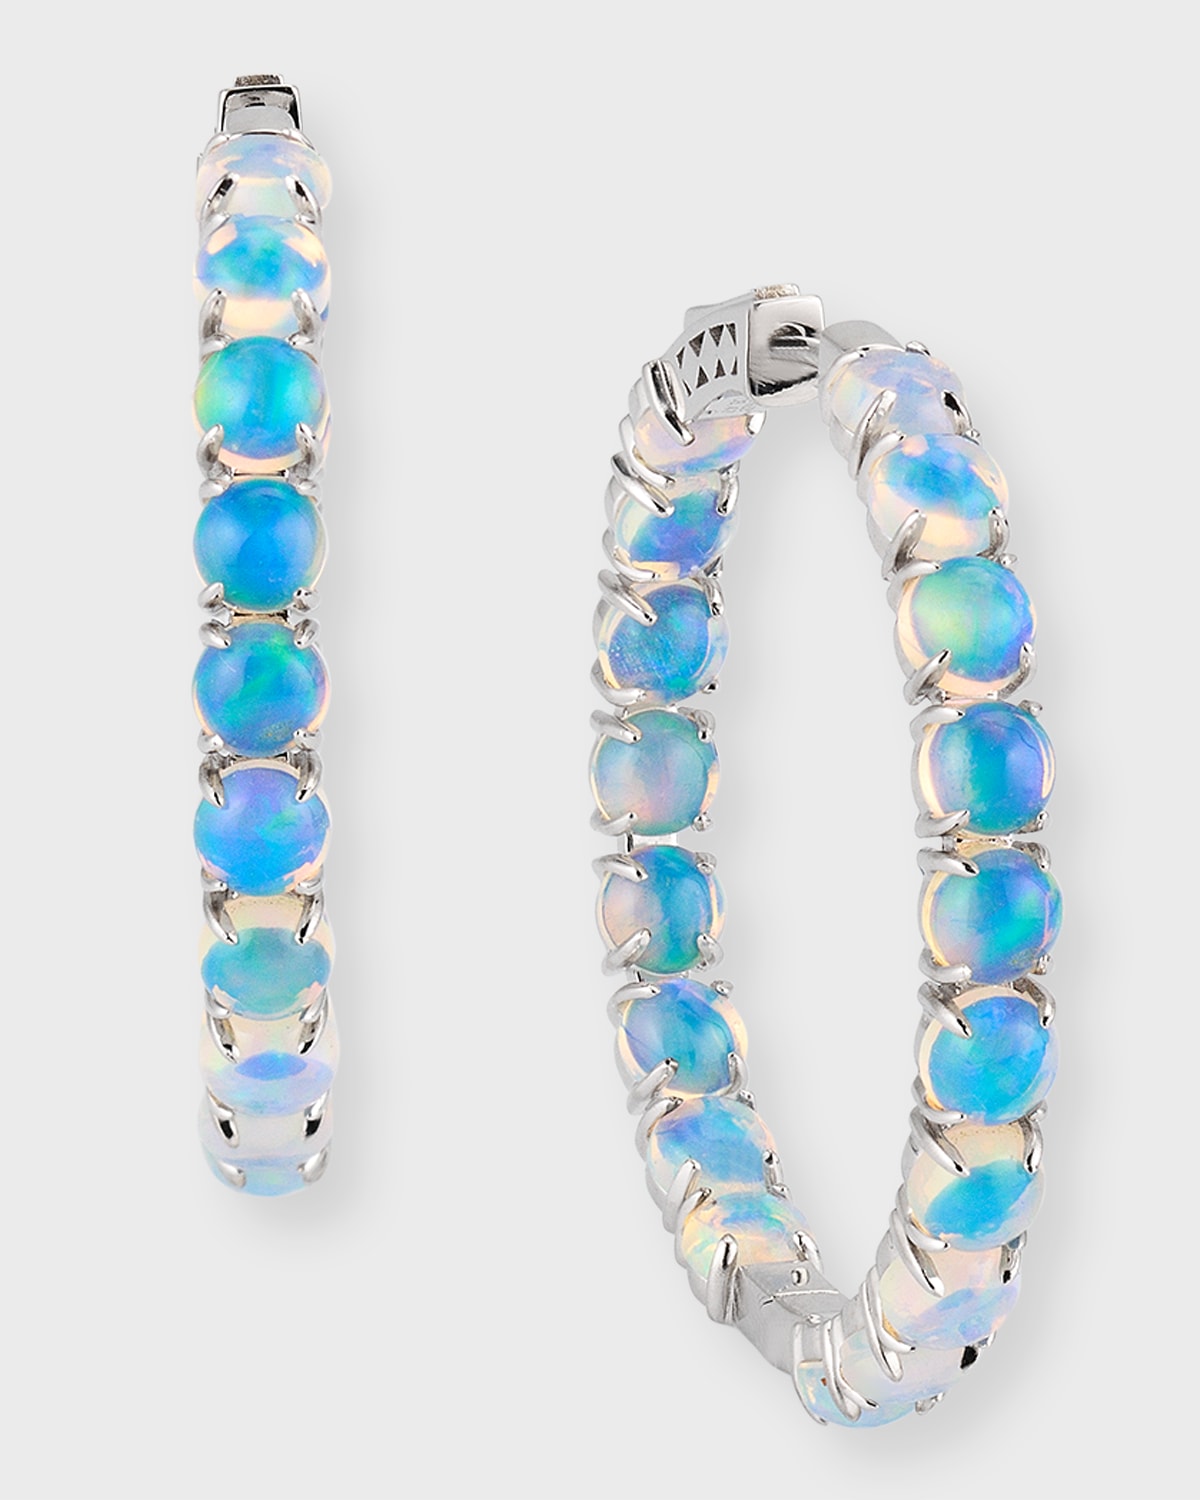 18K White Gold Hoop Earrings with Round Opals, 6.47tcw